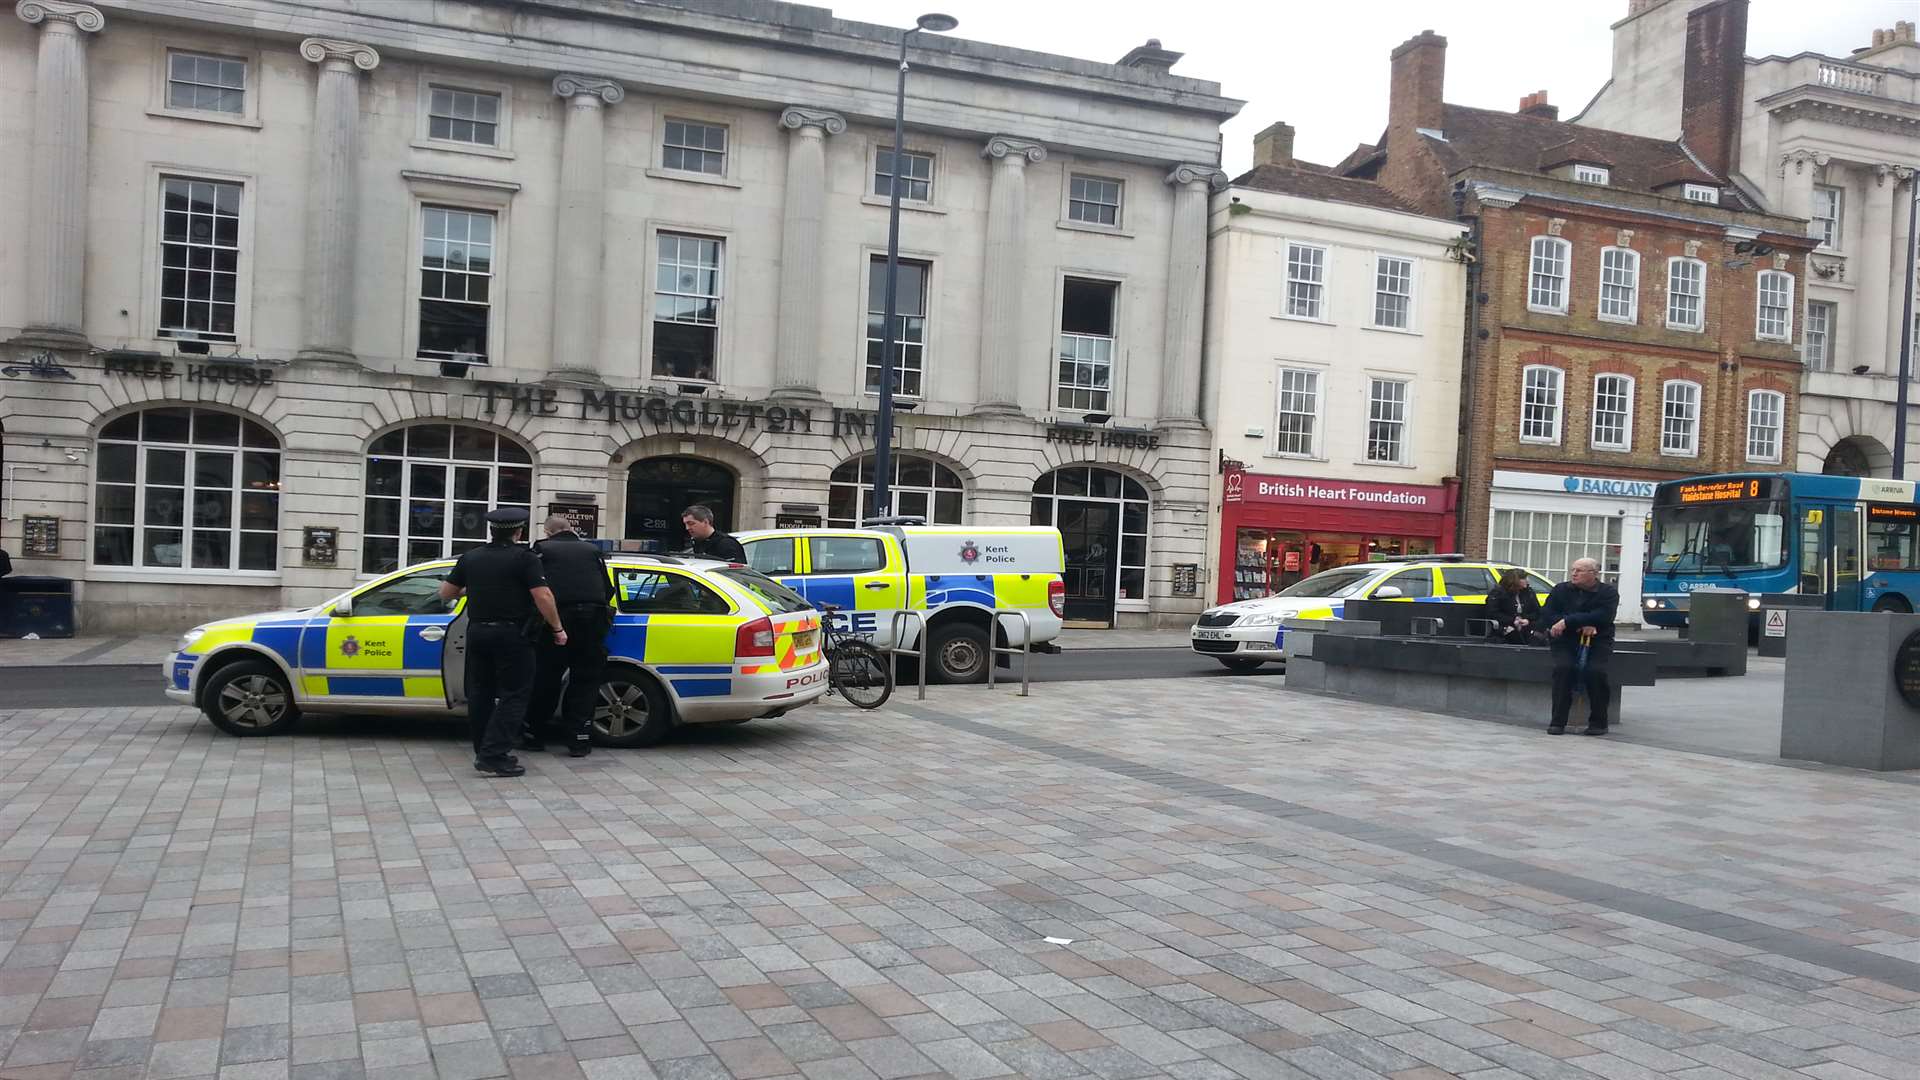 Police make an arrest in Jubilee Square, Maidstone. Picture: James Walker